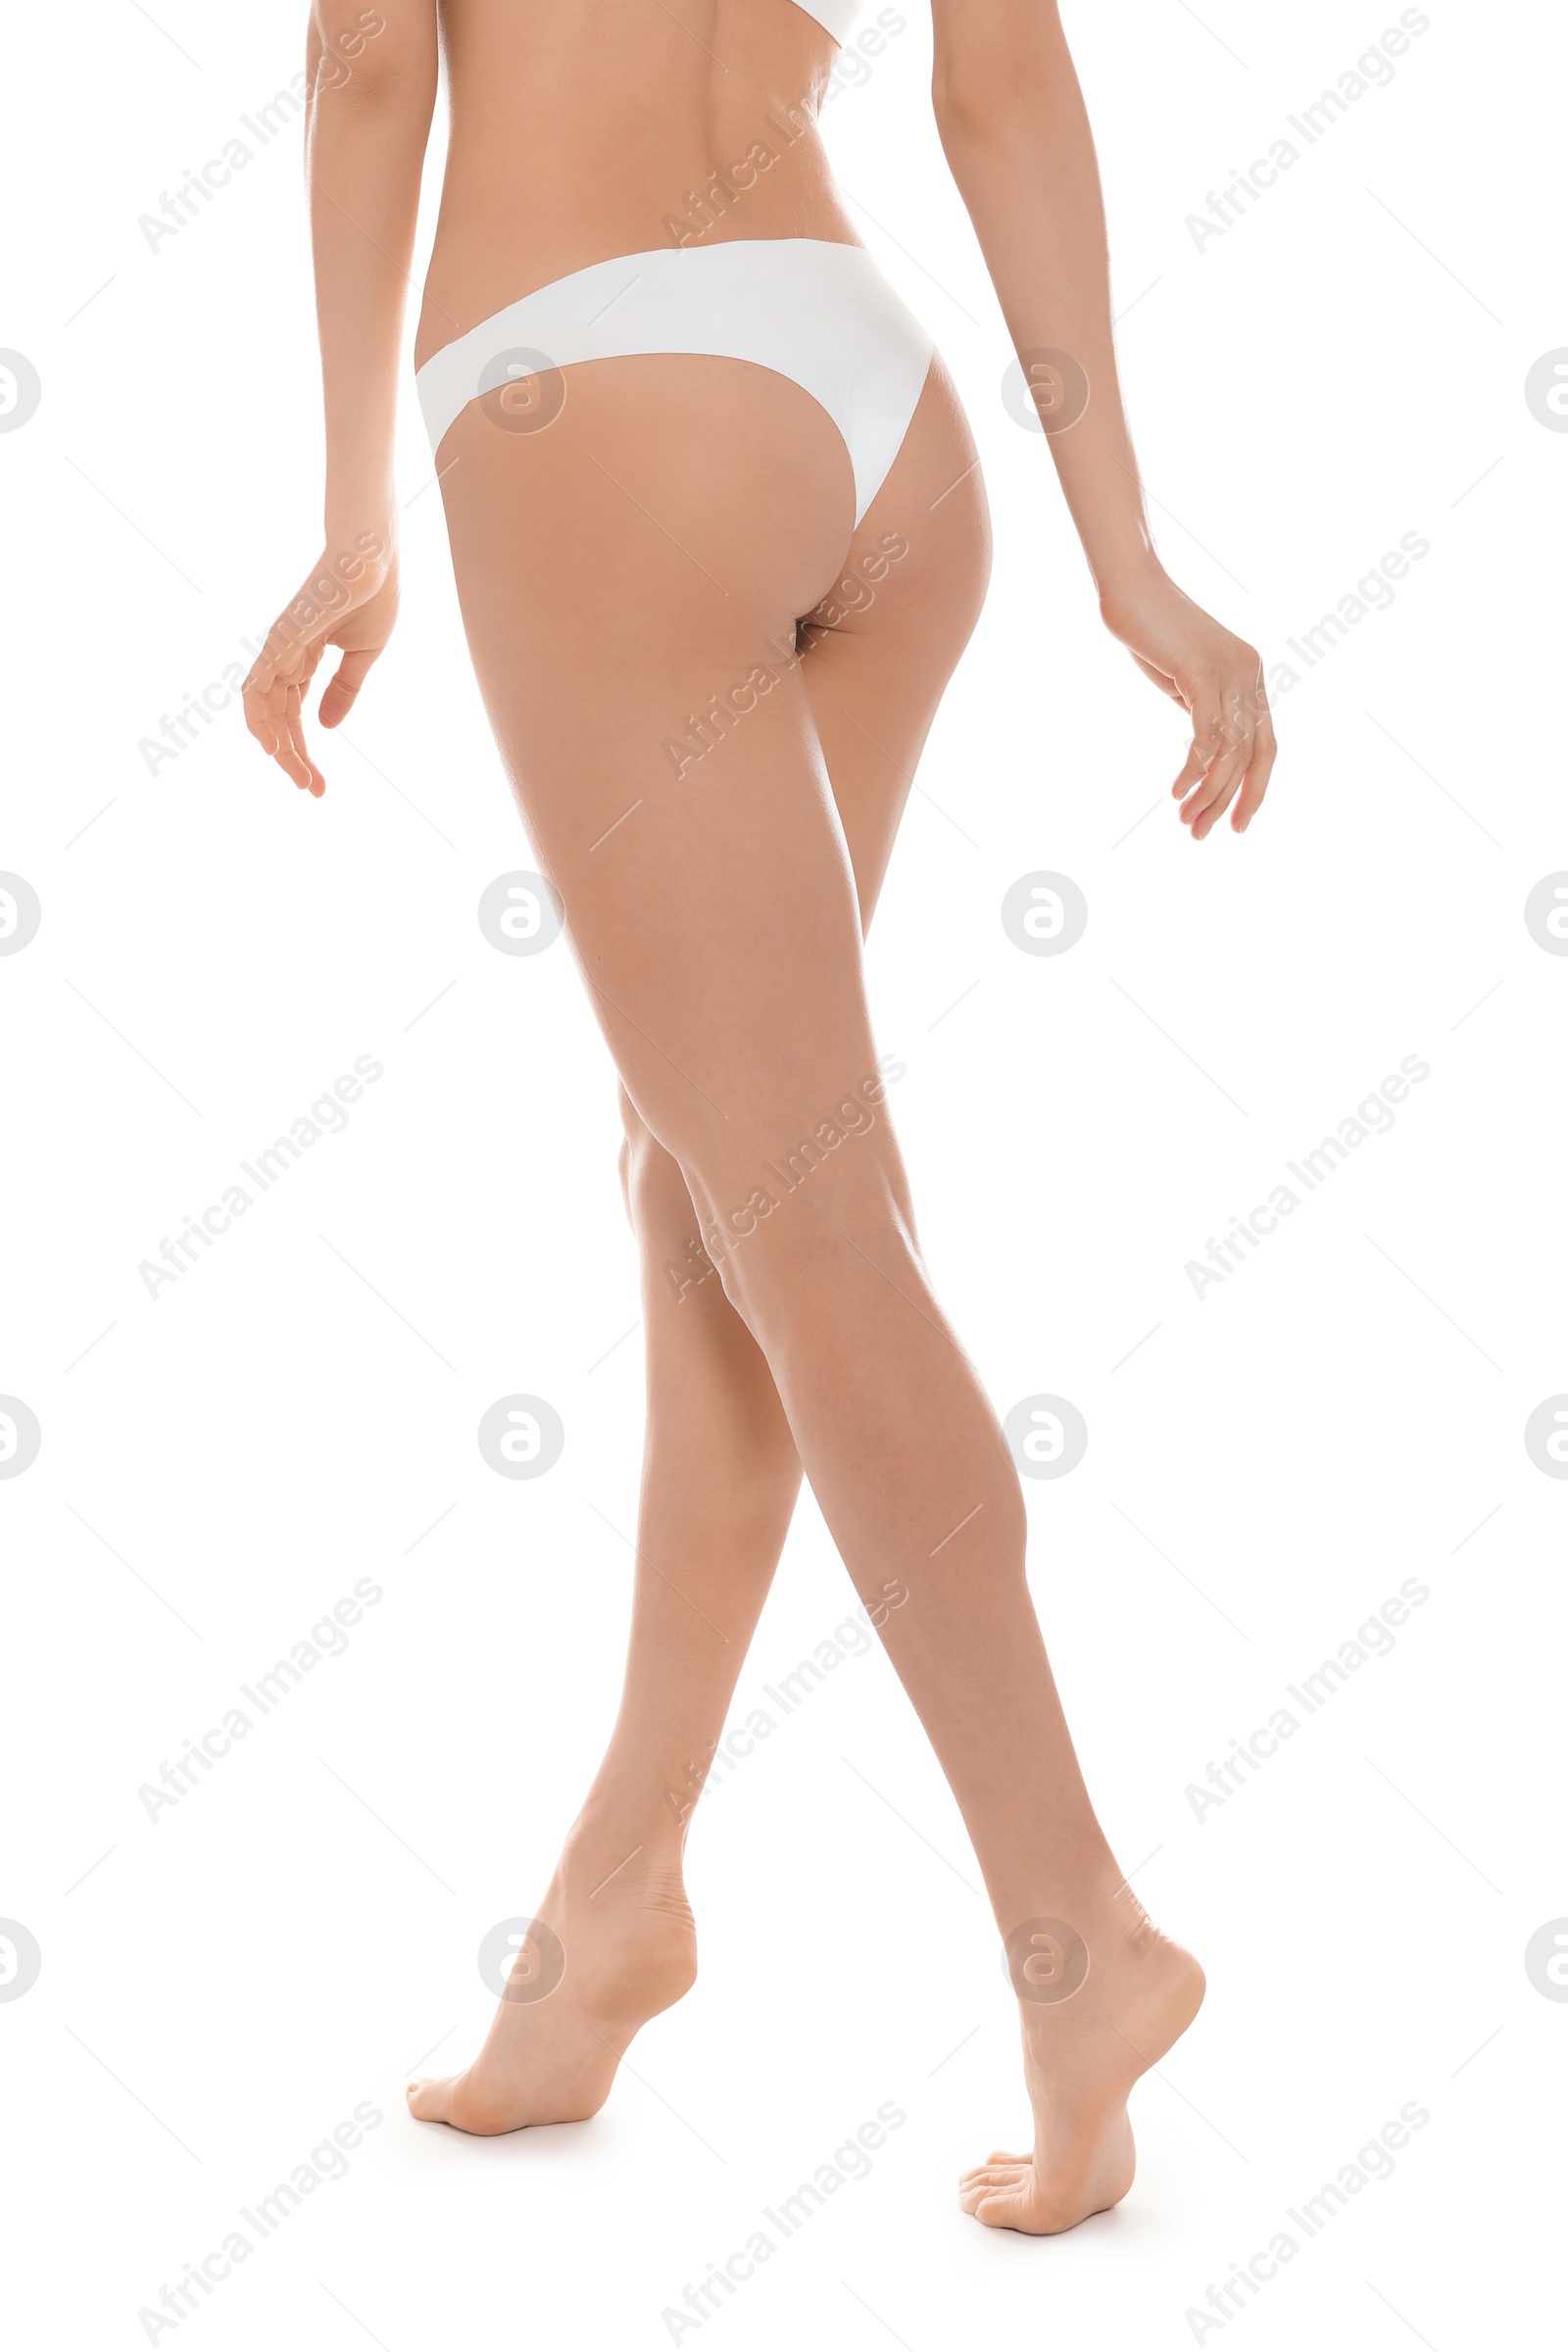 Photo of Slim young woman with smooth skin on white background. Beauty and body care concept